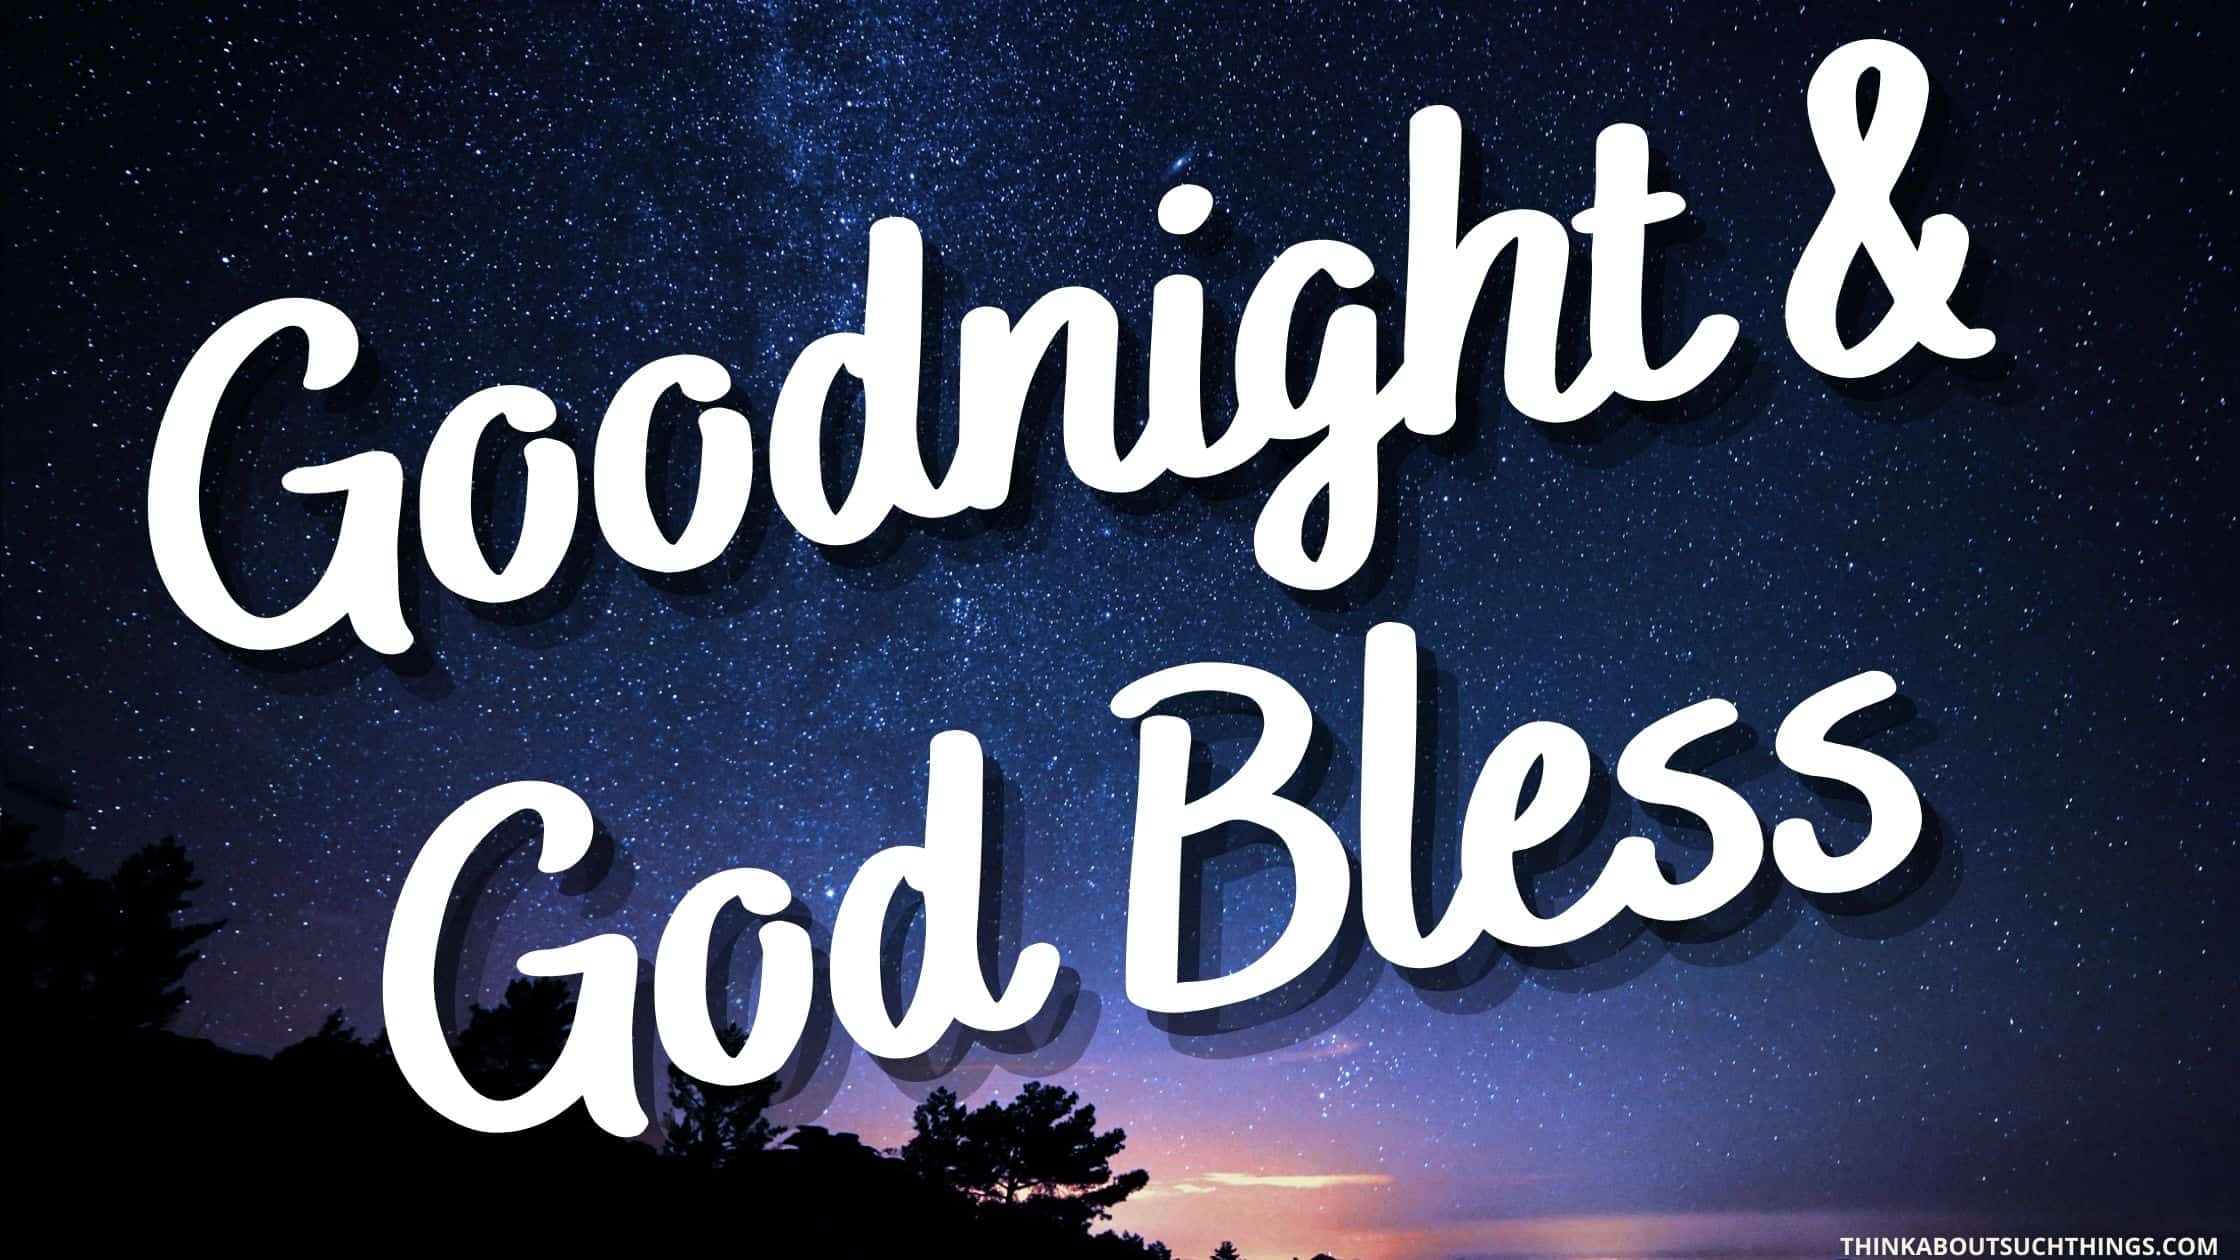 20 Goodnight Blessings To Share With Loved Ones With Images Think